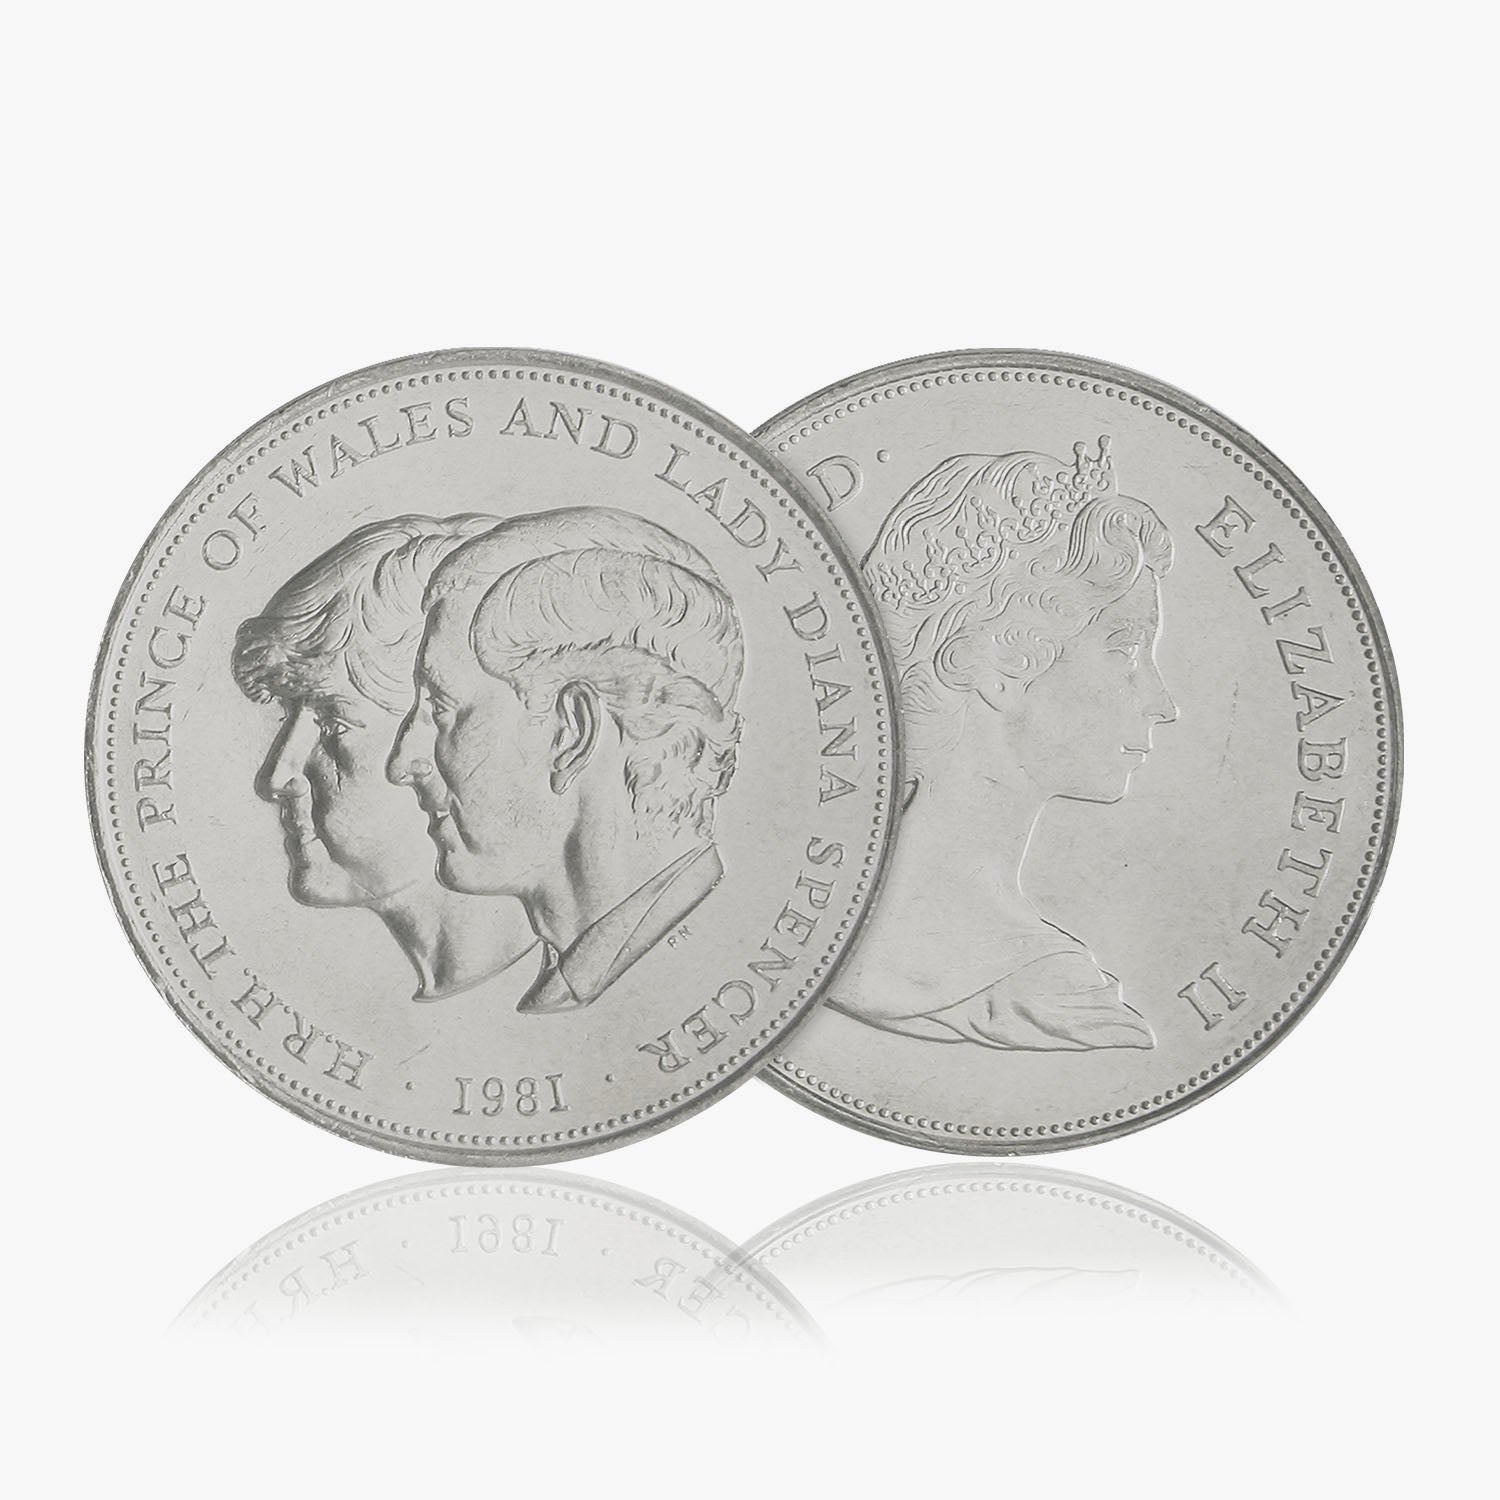 A Year of Royal Anniversaries Crown-Size Coin Set